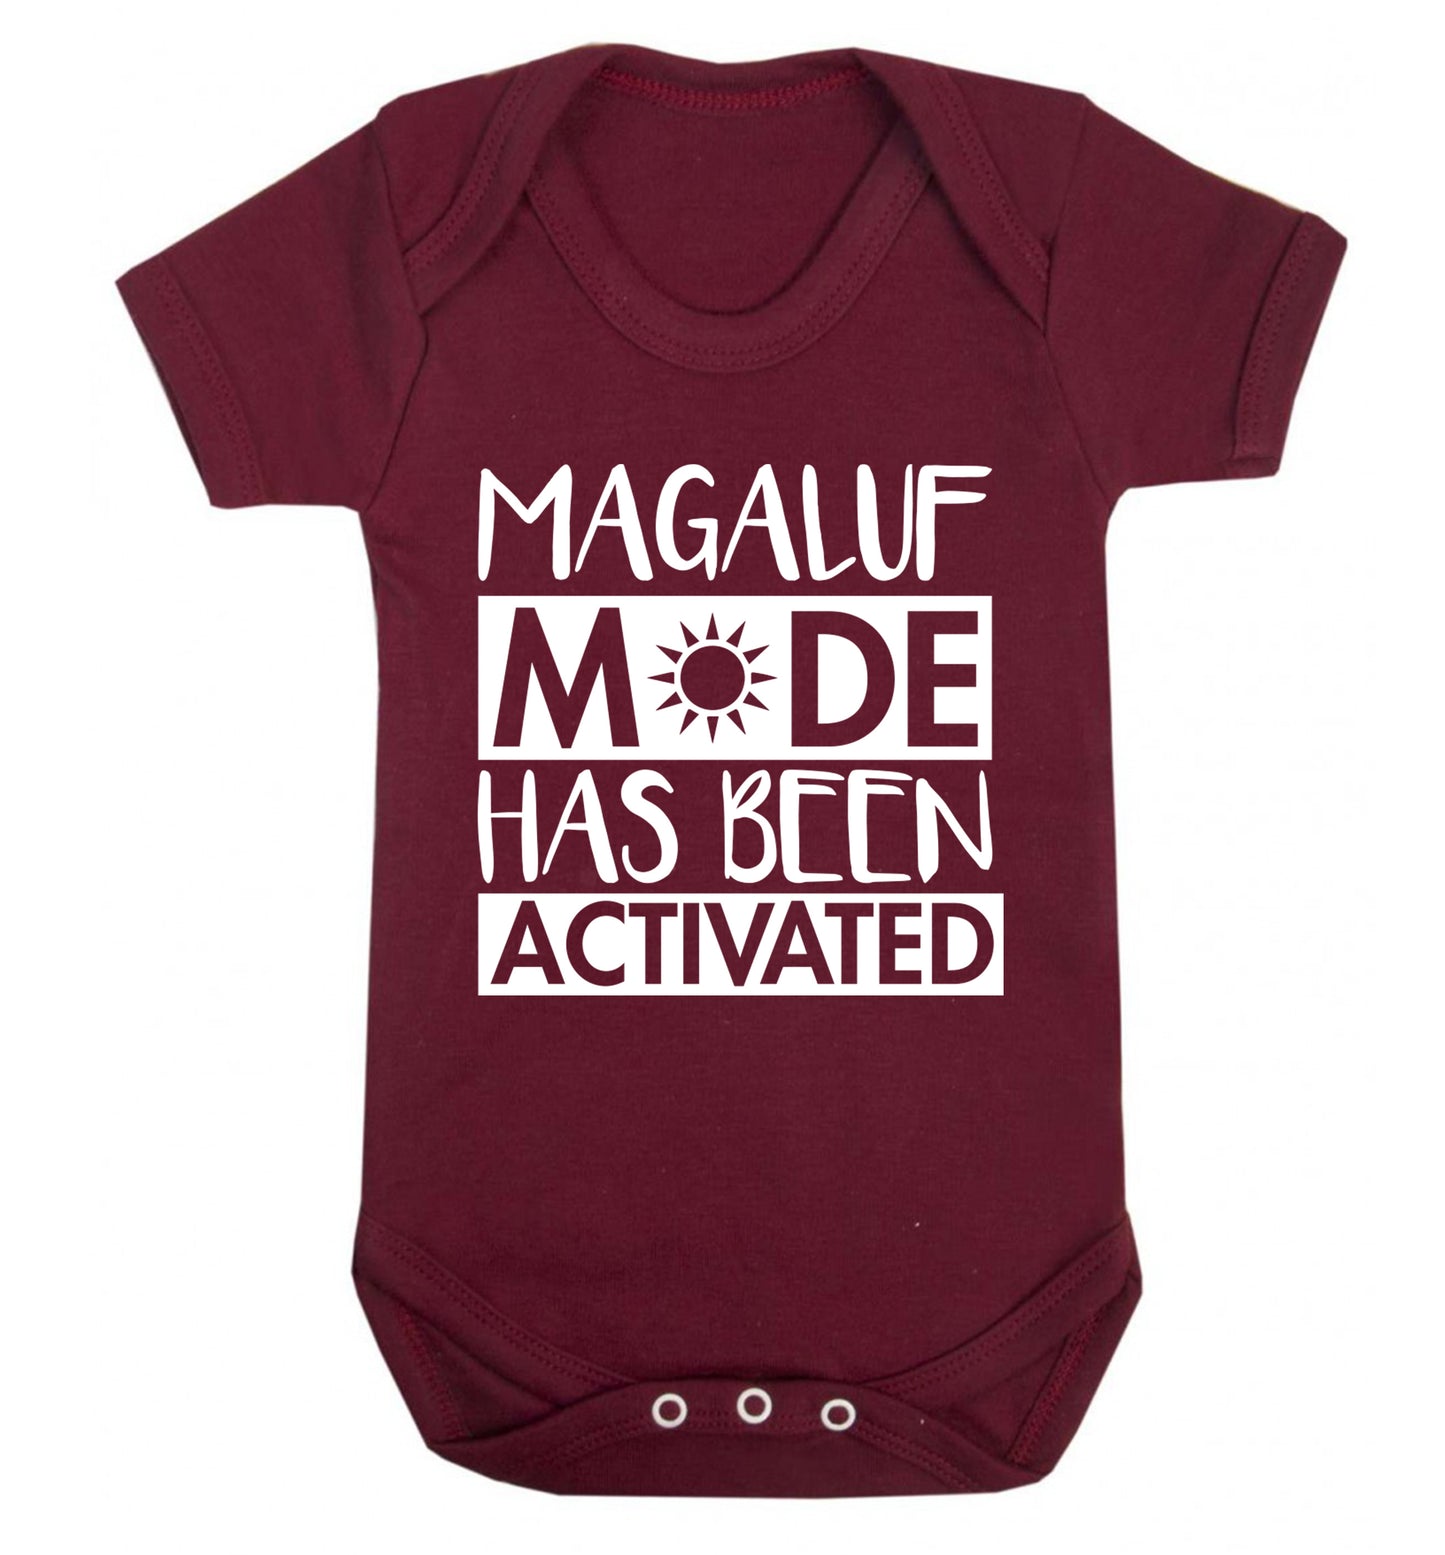 Magaluf mode has been activated Baby Vest maroon 18-24 months